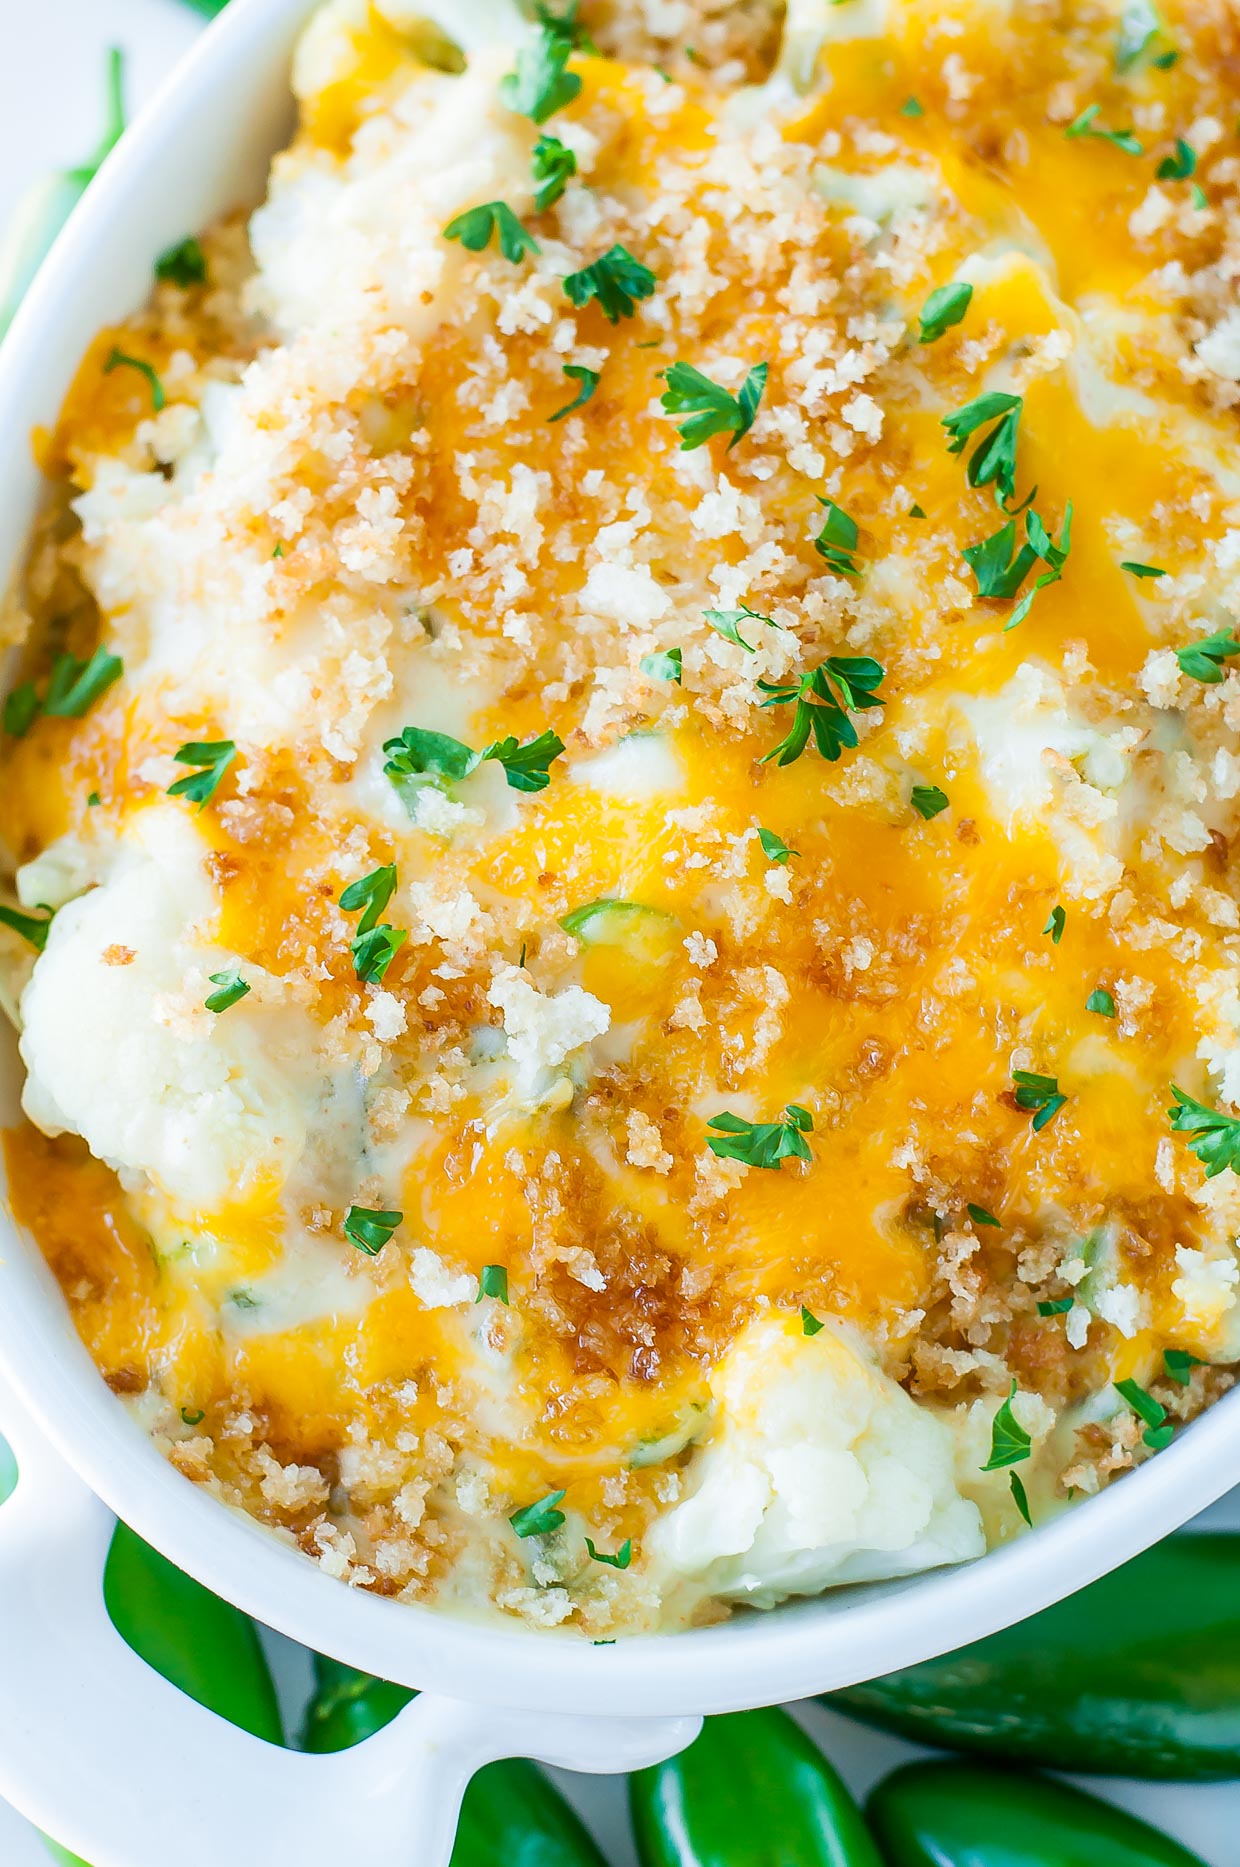 Totally unconventional and wildly delicious, this Creamy Cauliflower Jalapeño Popper Casserole is an easy cheesy veggie gratin with a kick!